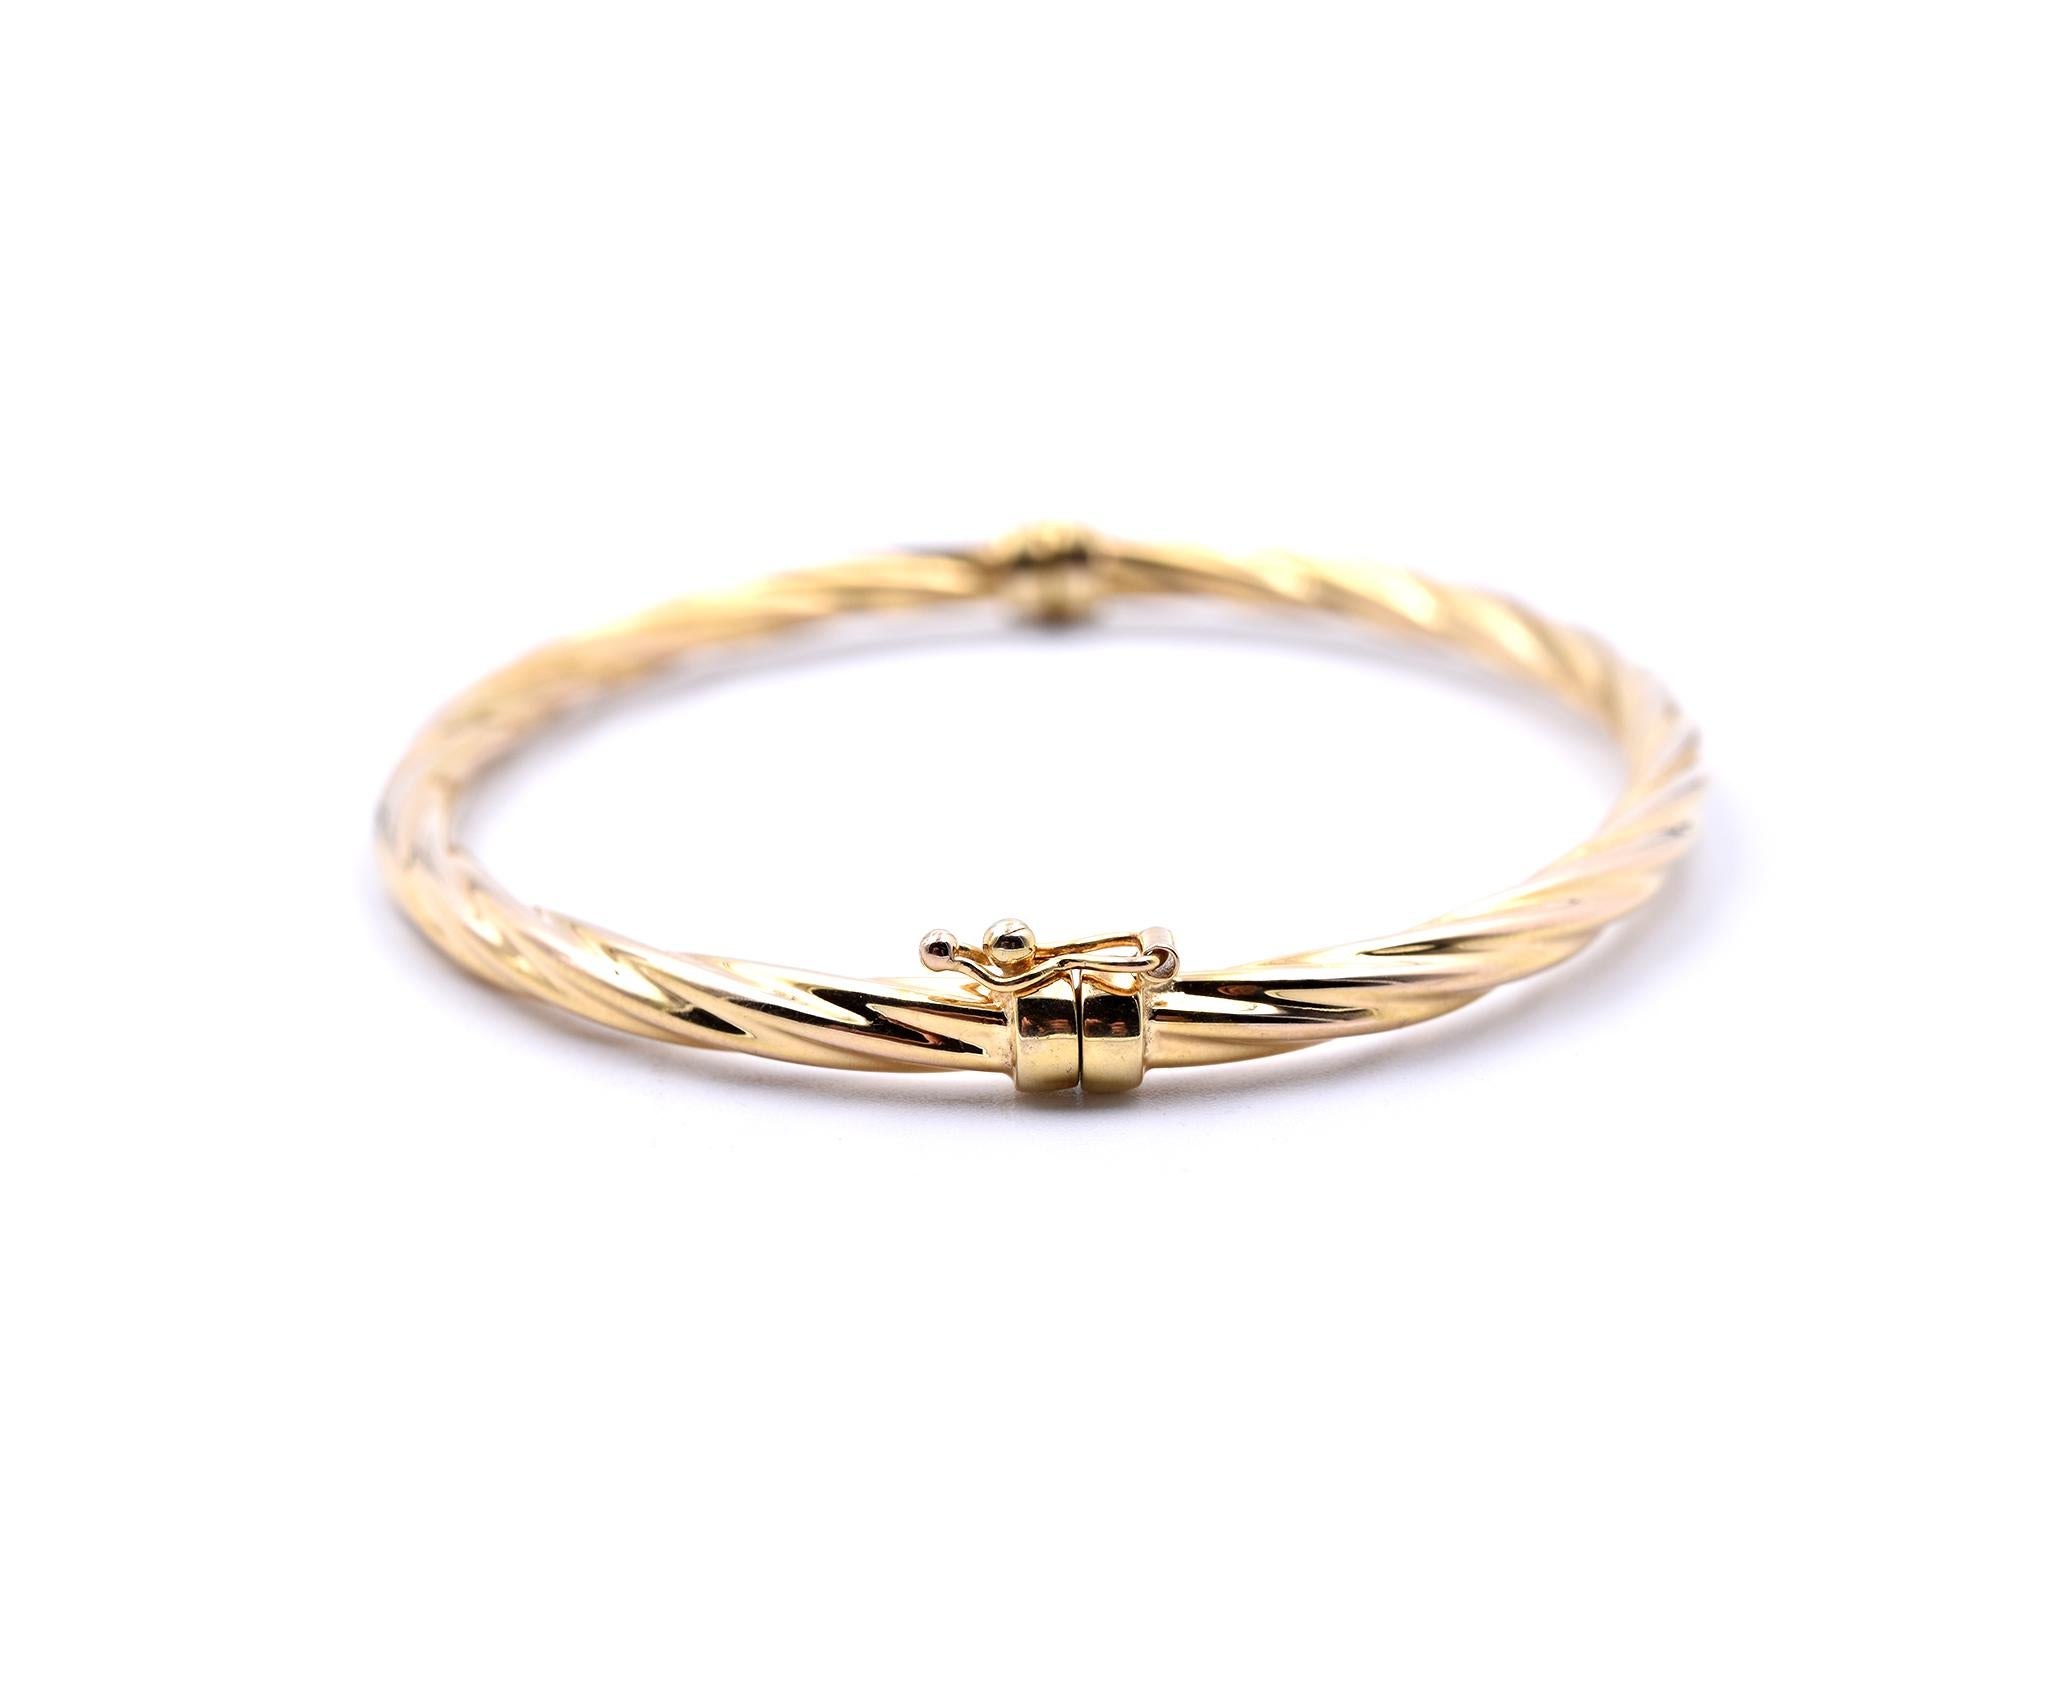 Designer: custom
Material: 14k yellow gold
Dimensions: bracelet is approximately 7-inches long, measures 4.10mm in width
Weight: 5.71 grams
